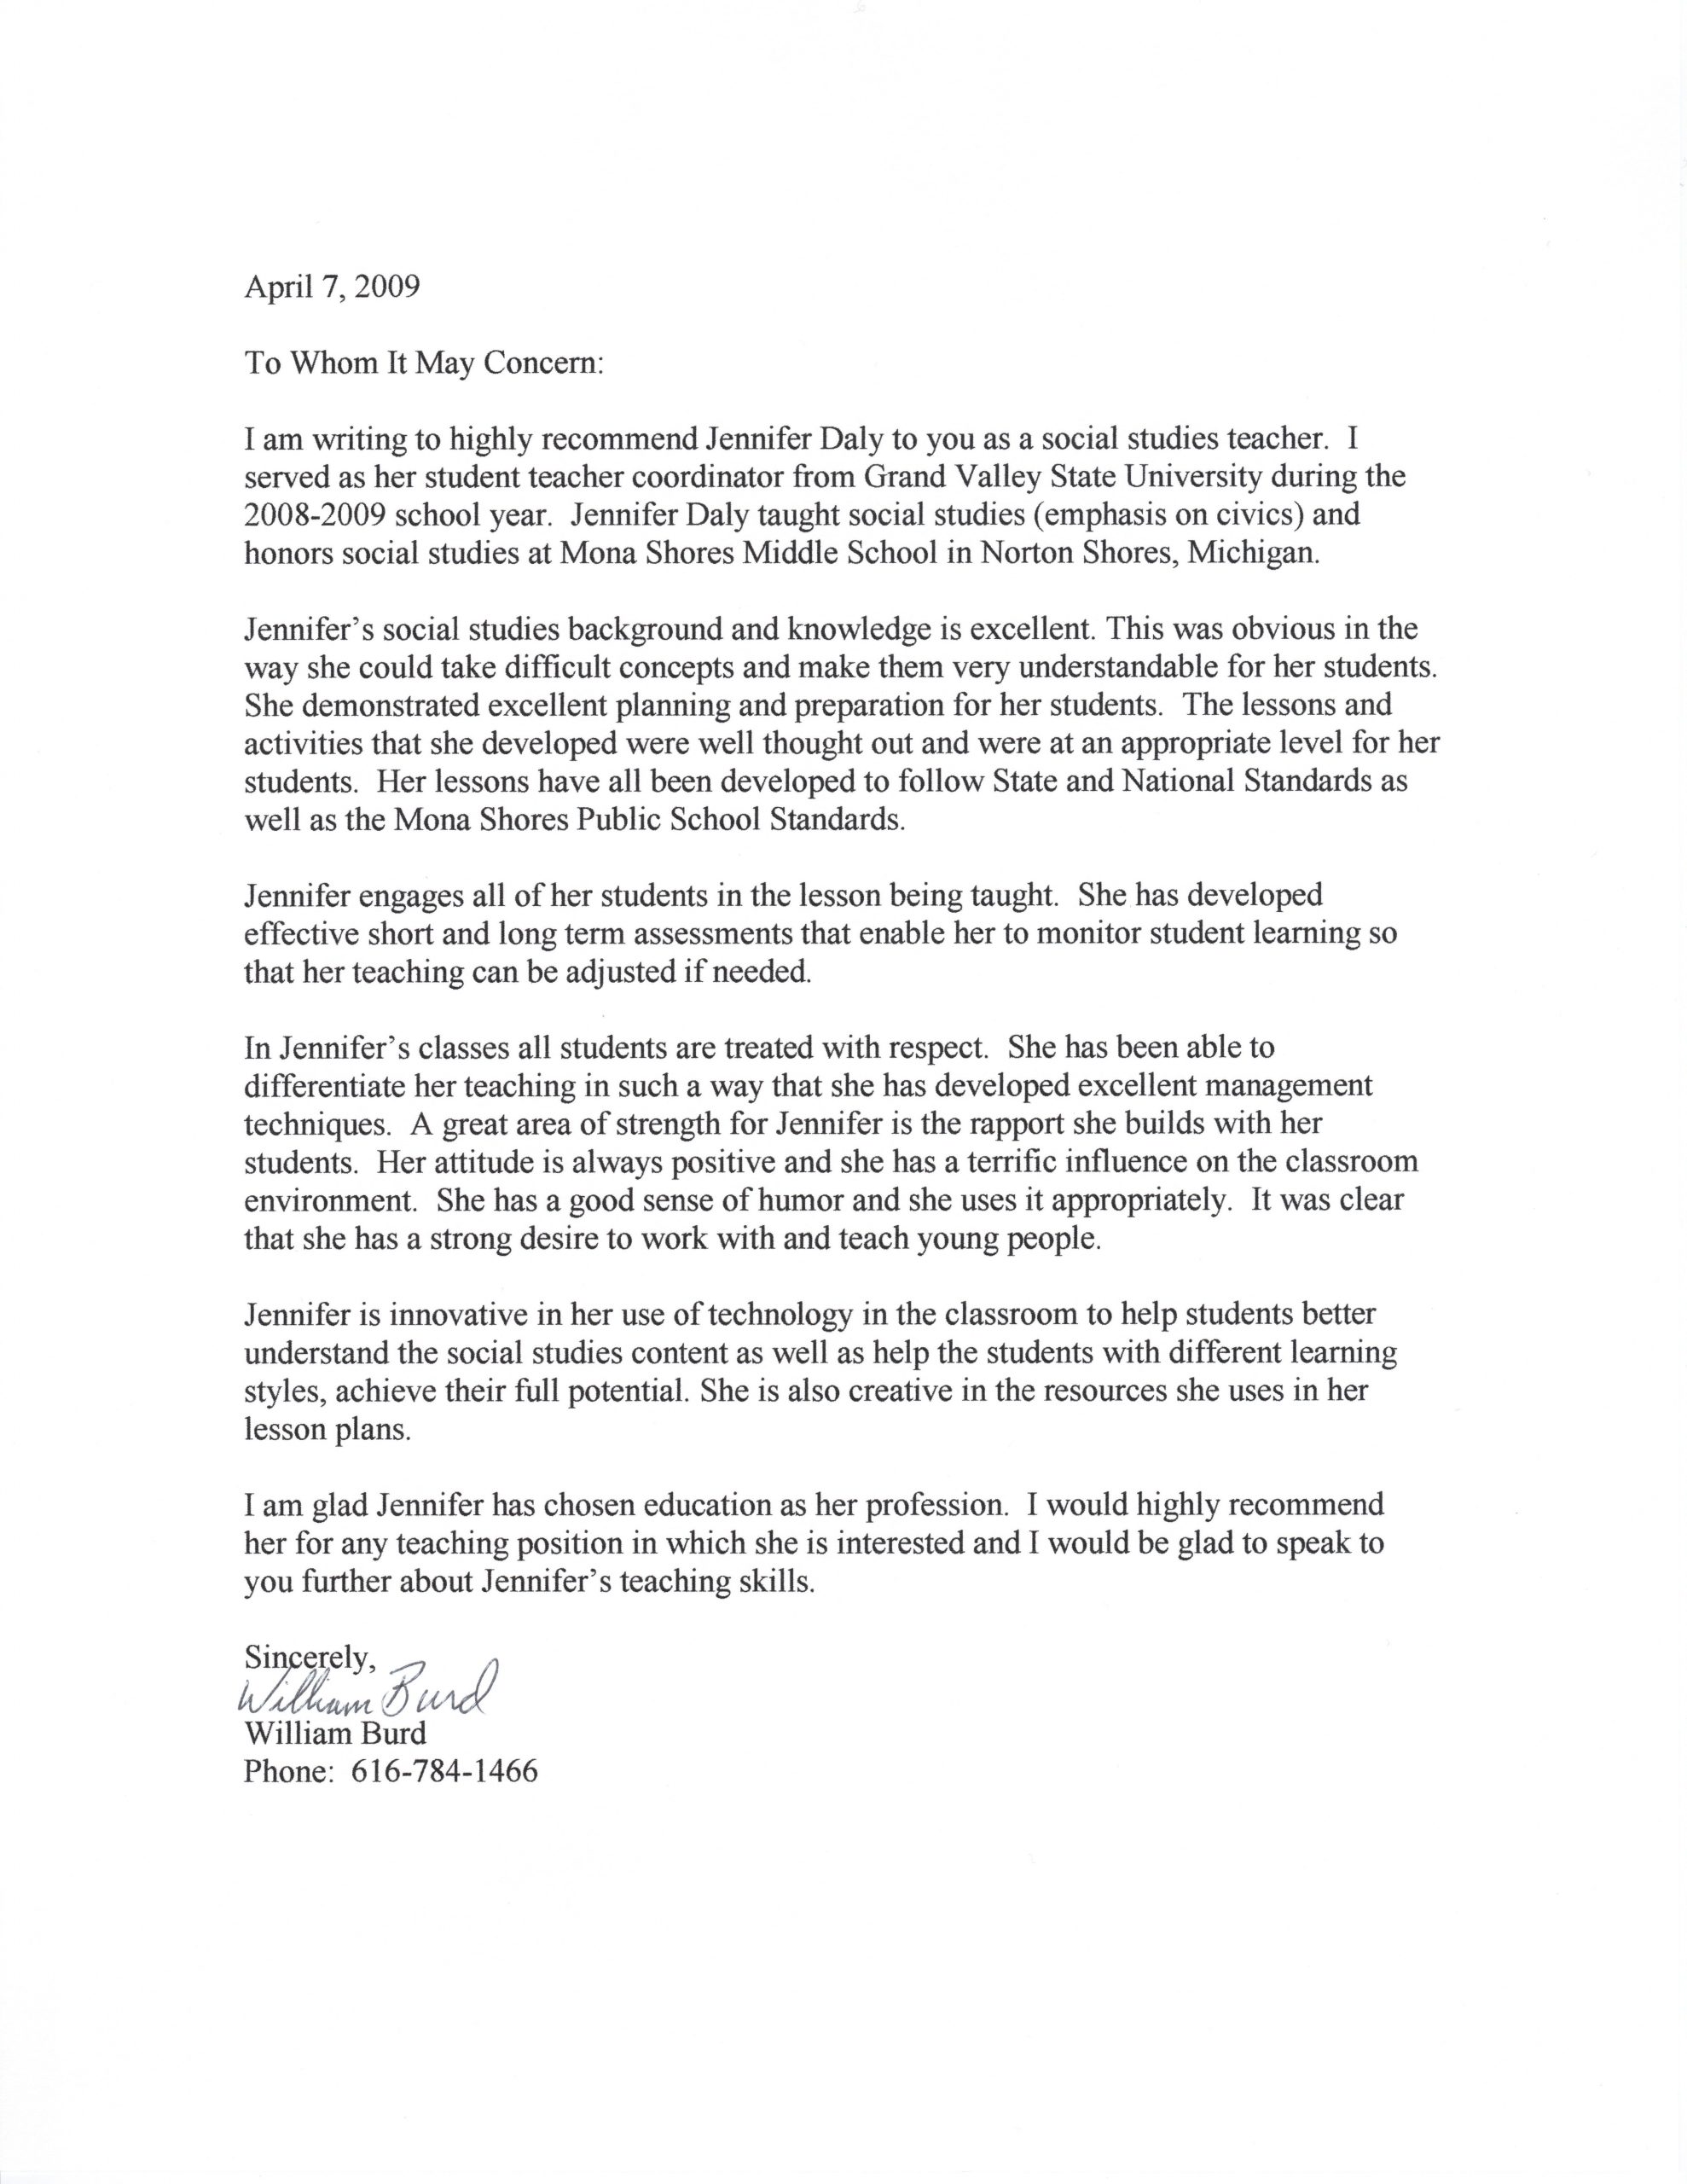 Student Teacher Recommendation Letter Examples Letter Of for measurements 5100 X 6600